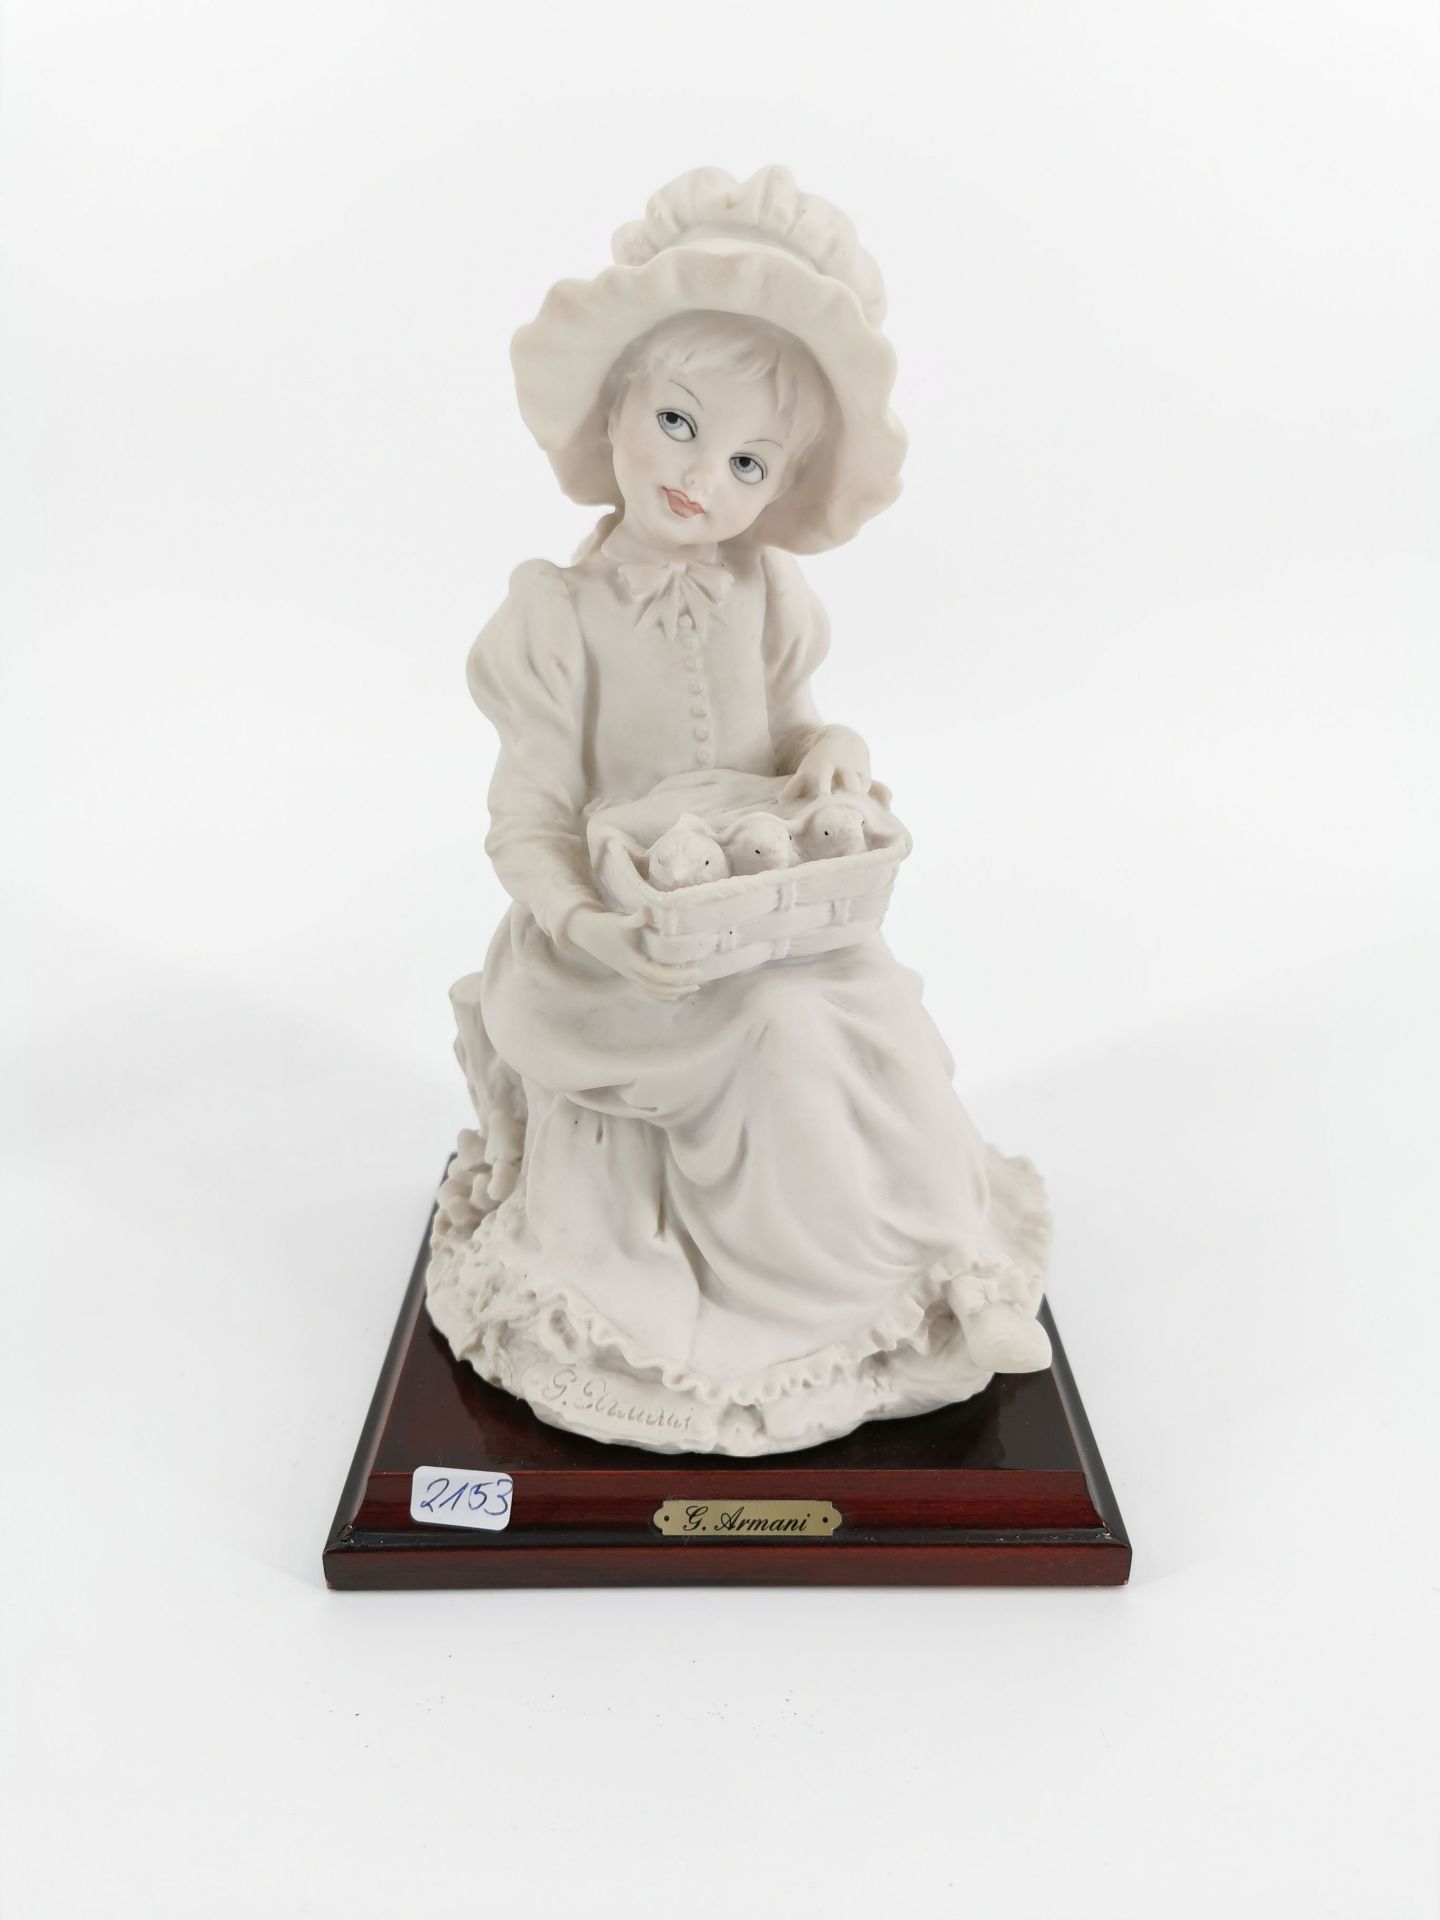 PORCELAIN FIGURE "GIRL WITH CHICKS"